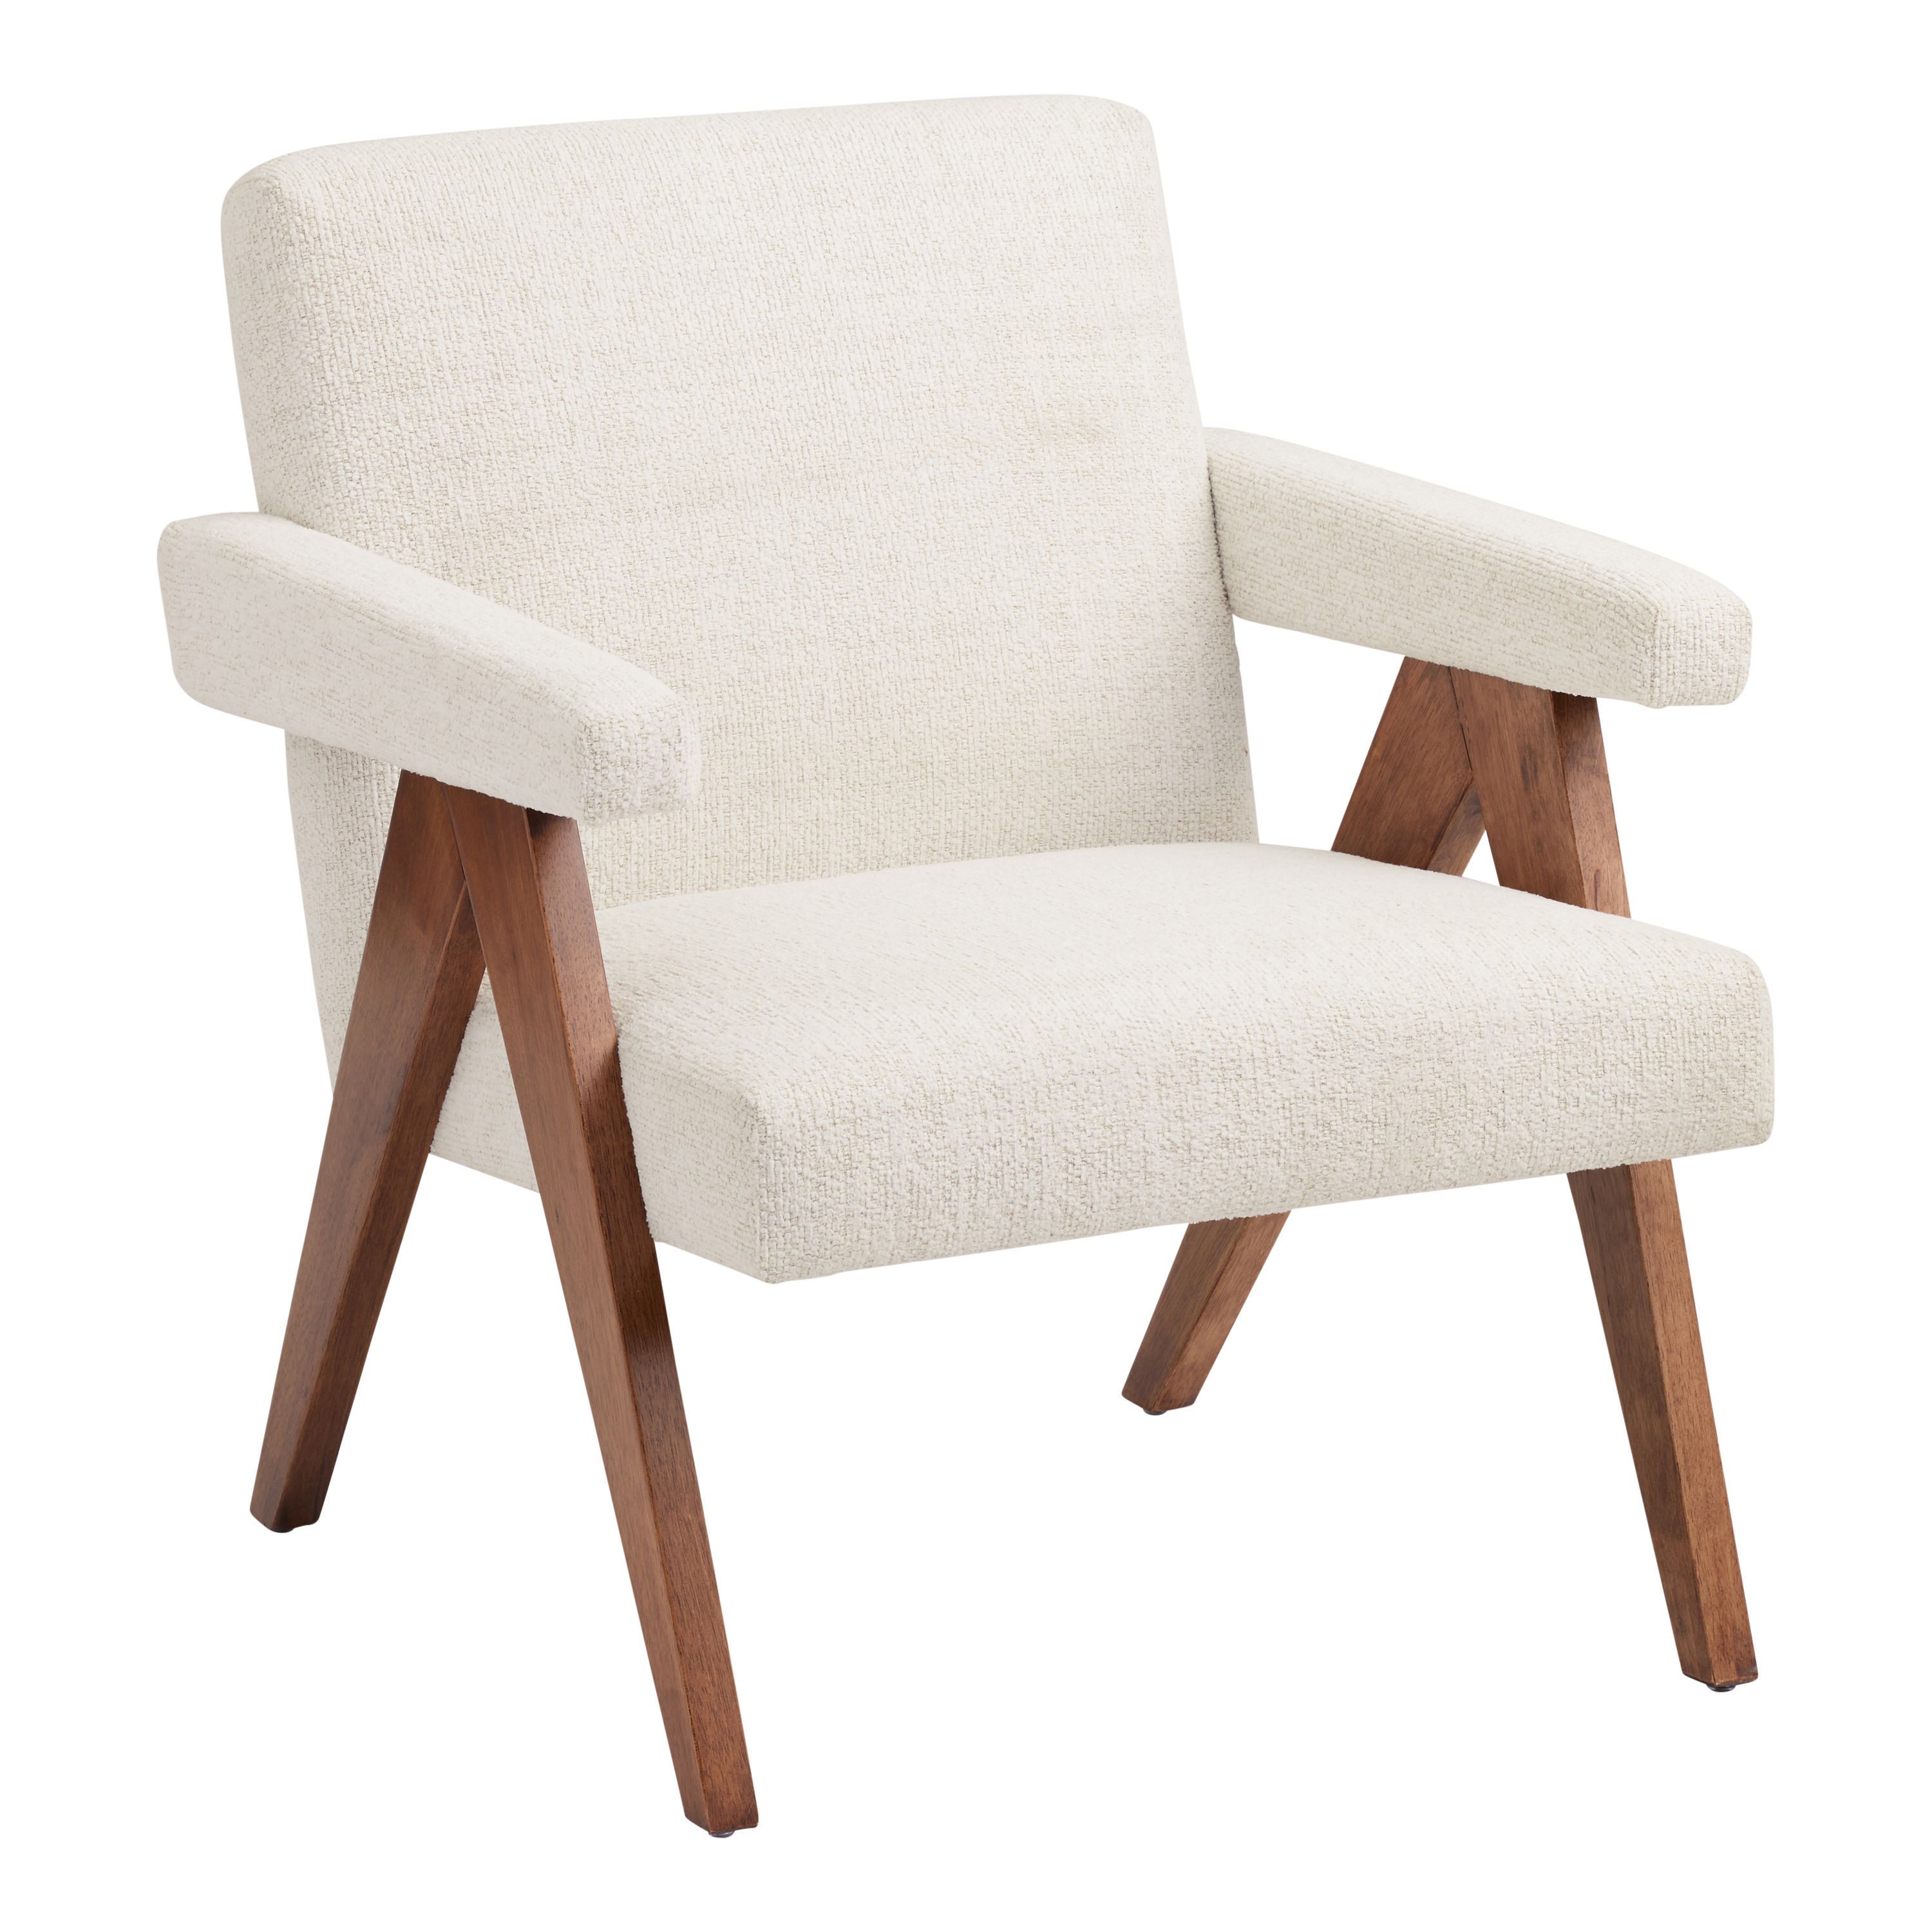 Braxton Ivory Flax Boucle A Frame Upholstered Chair | World Market